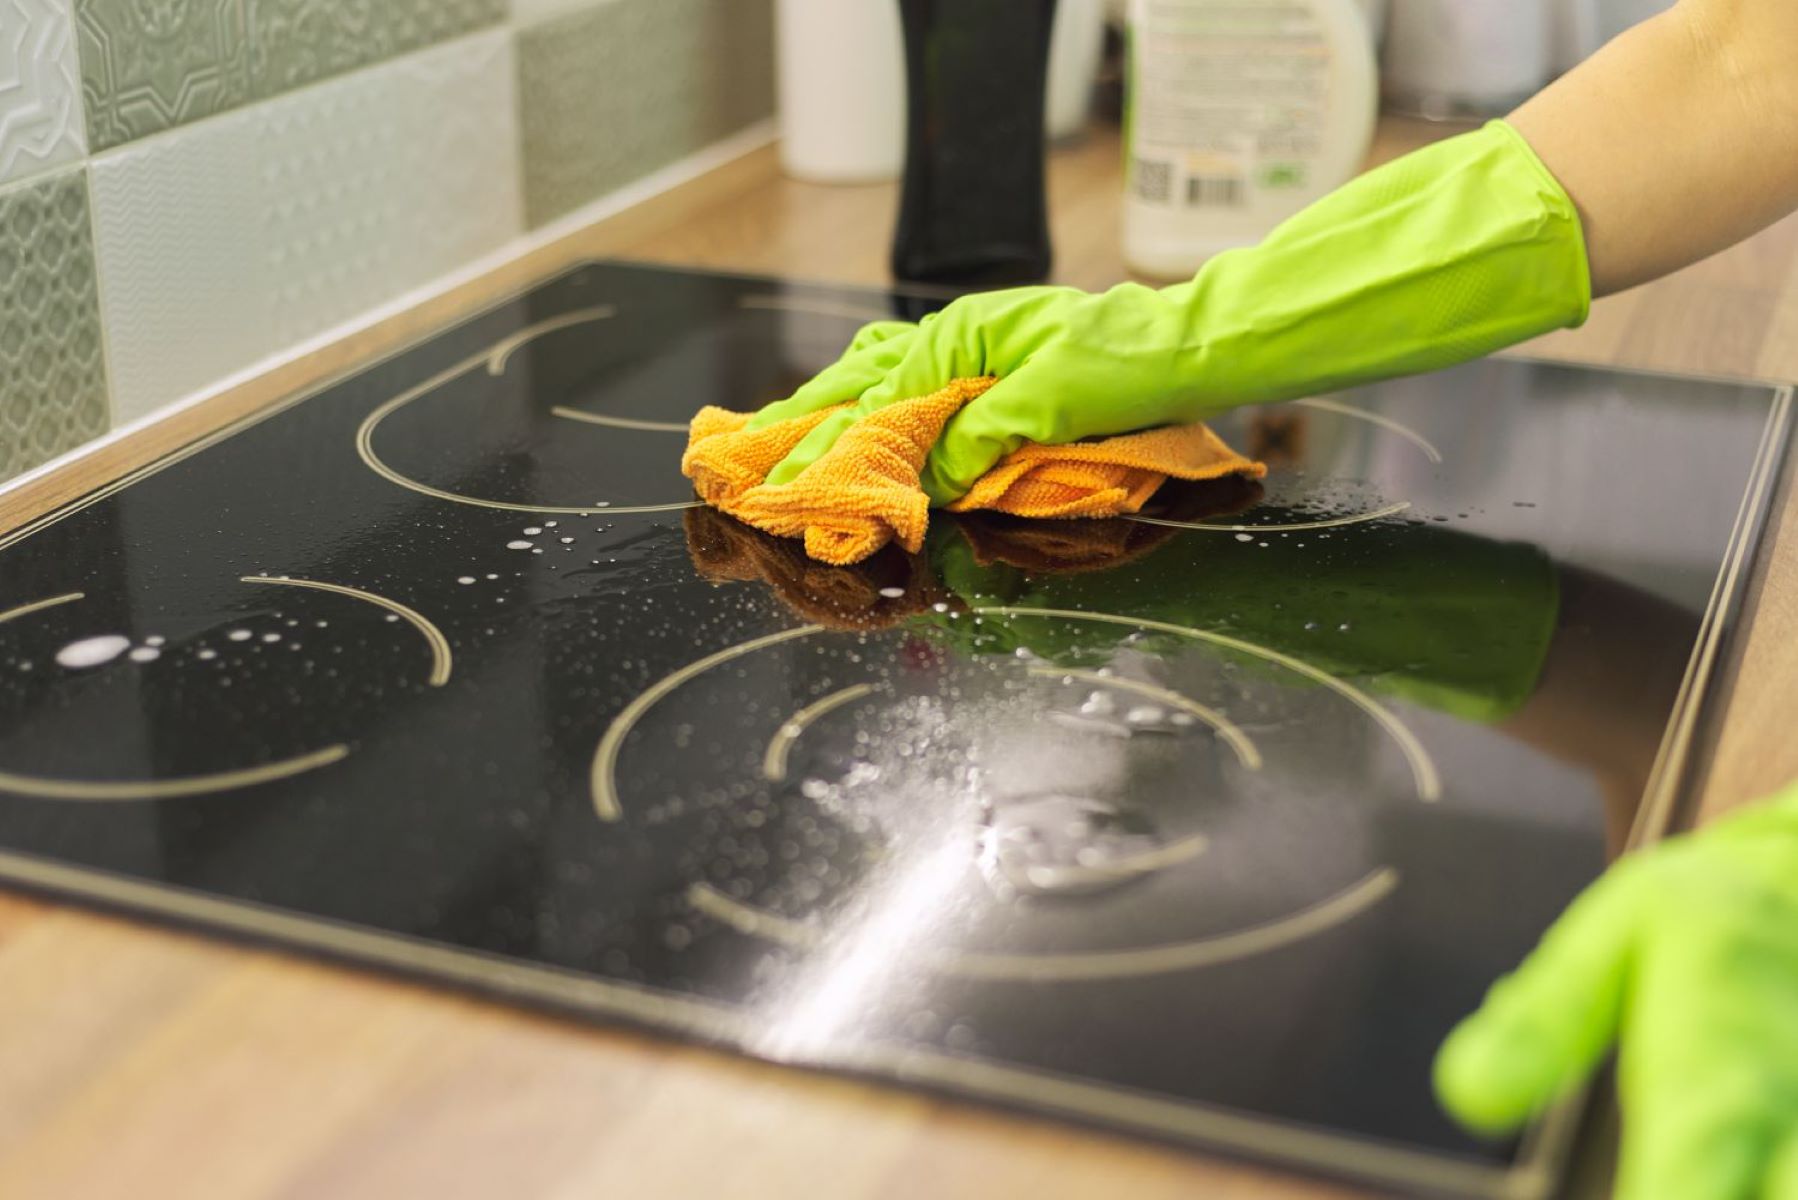 How To Clean Glass Stovetop